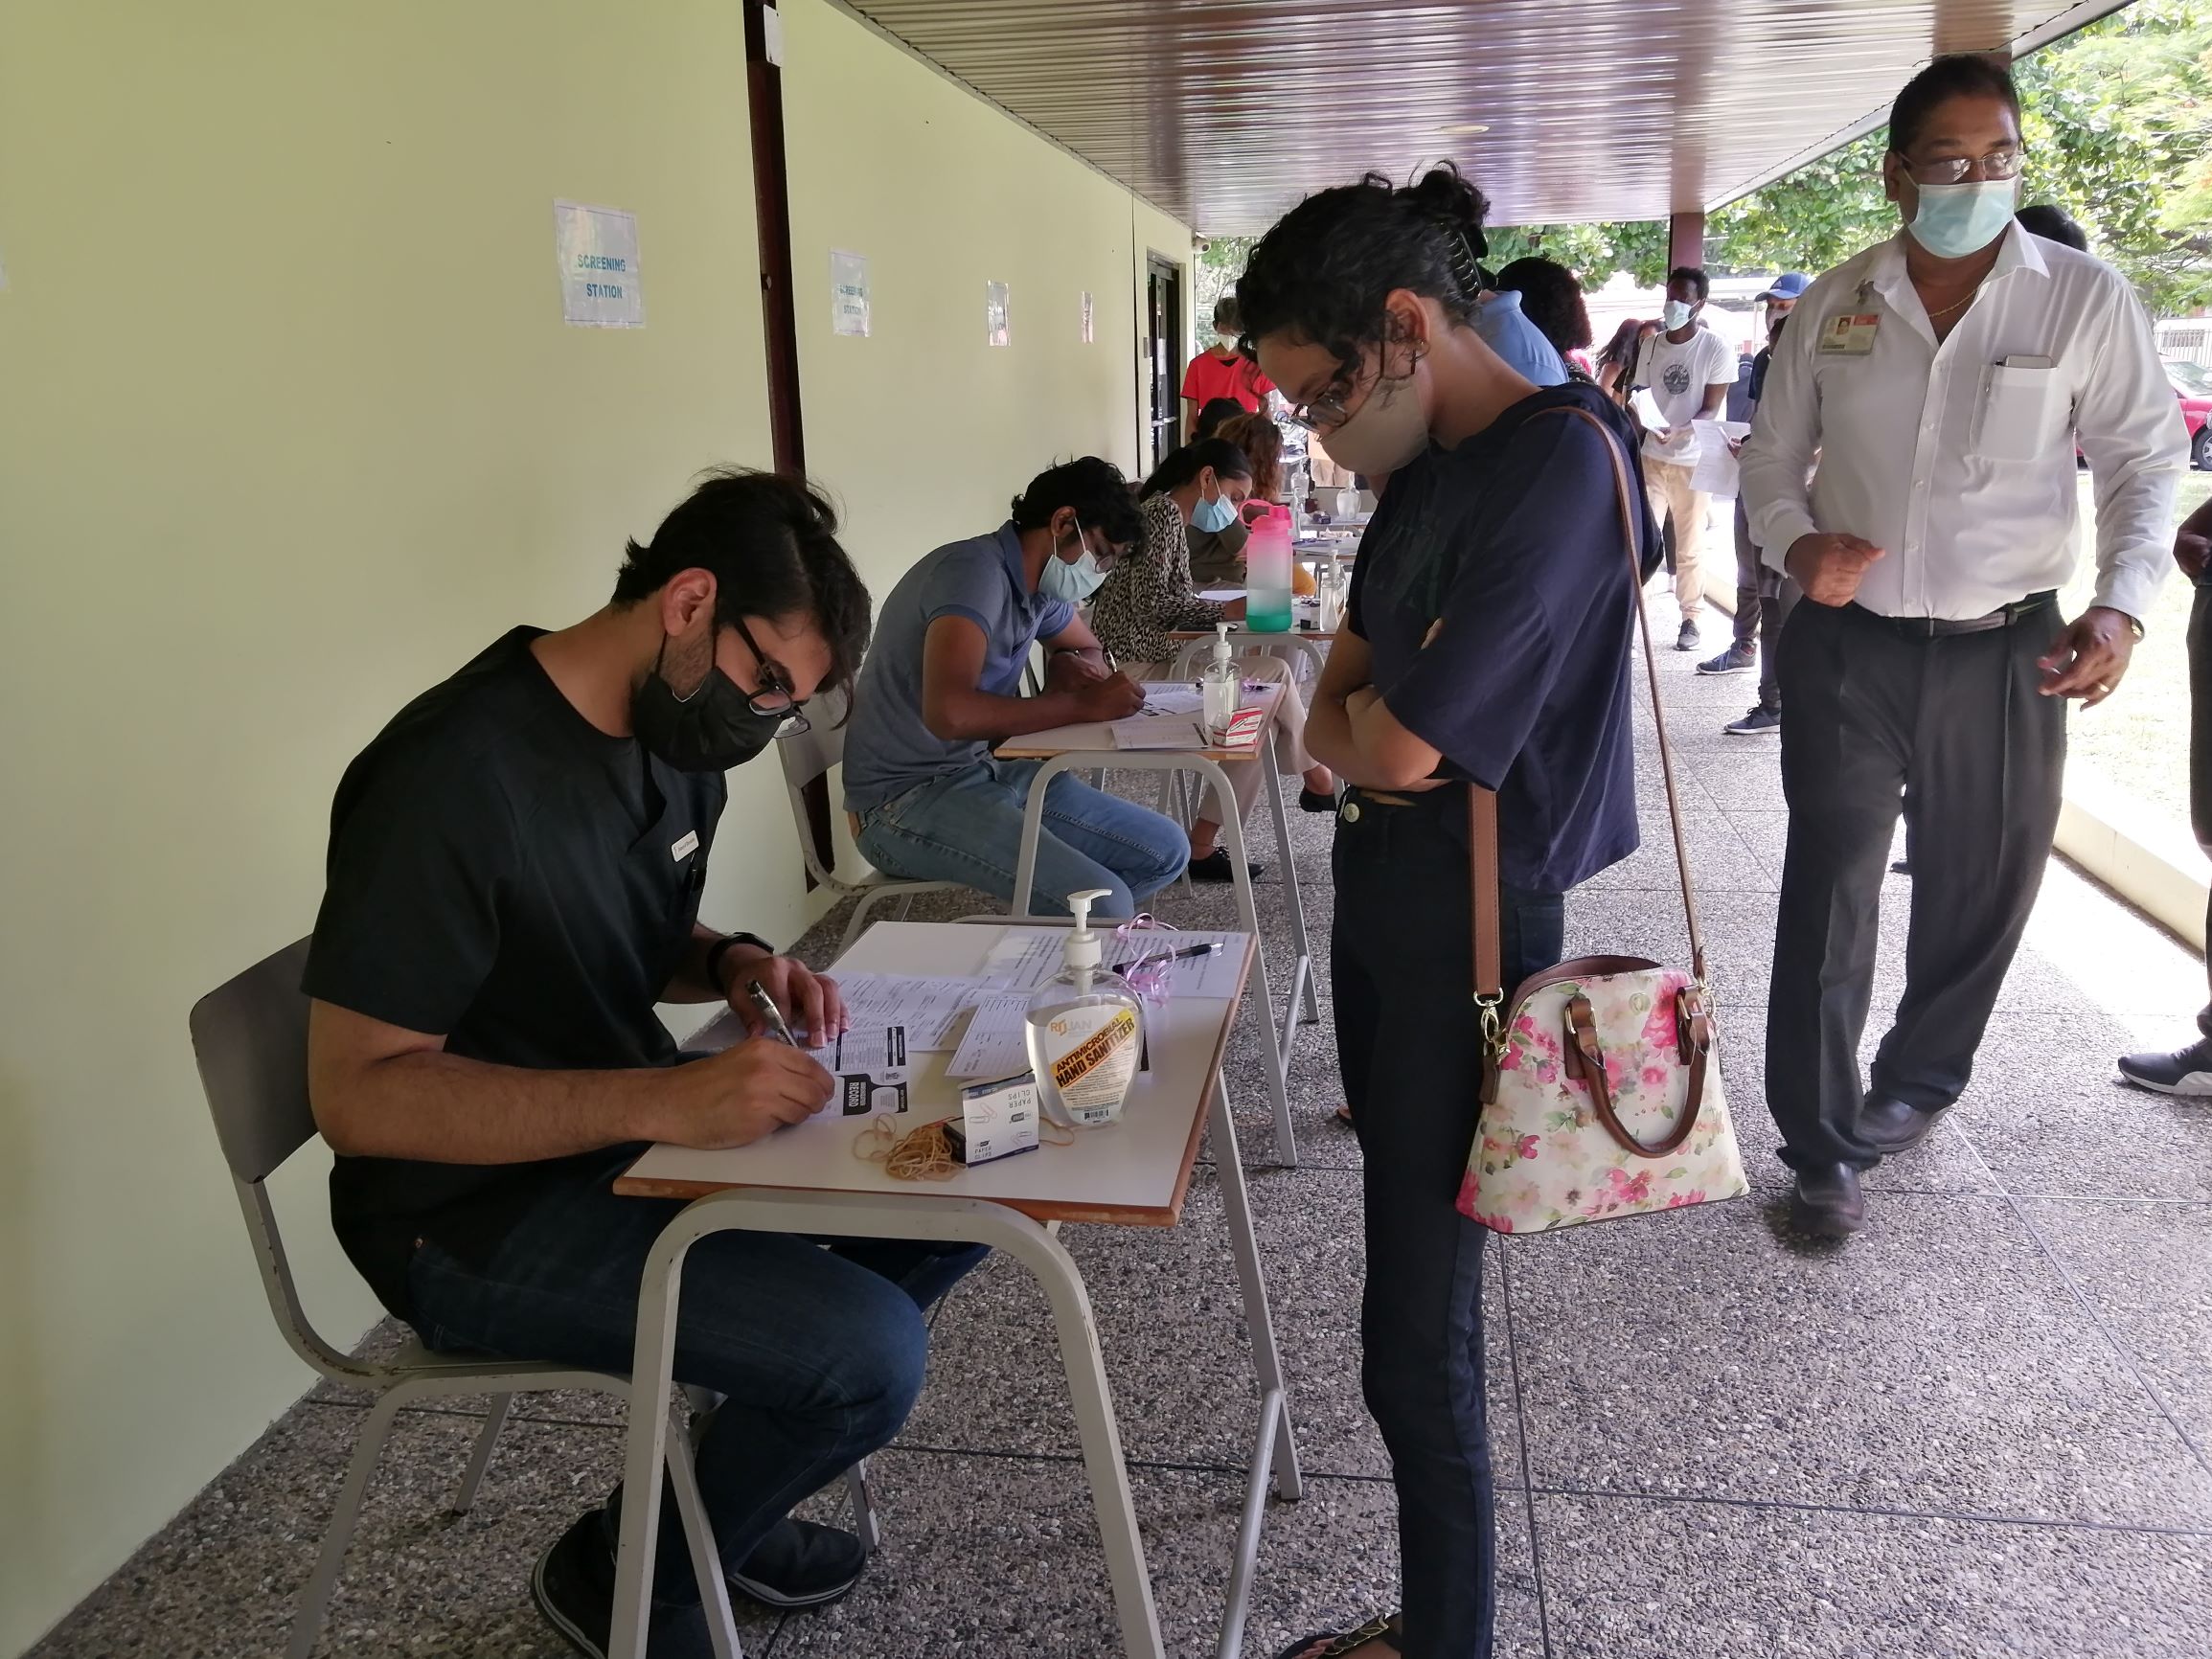 A UWI St. Augustine Campus student gets her documents checked by a UWI student volunteer before being administered the COVID-19 vaccine at The UWI Inn and Conference Centre. At right supervising the exercise is Dr. Neil Singh, Head, Health Services Unit The UWI St. Augustine Campus